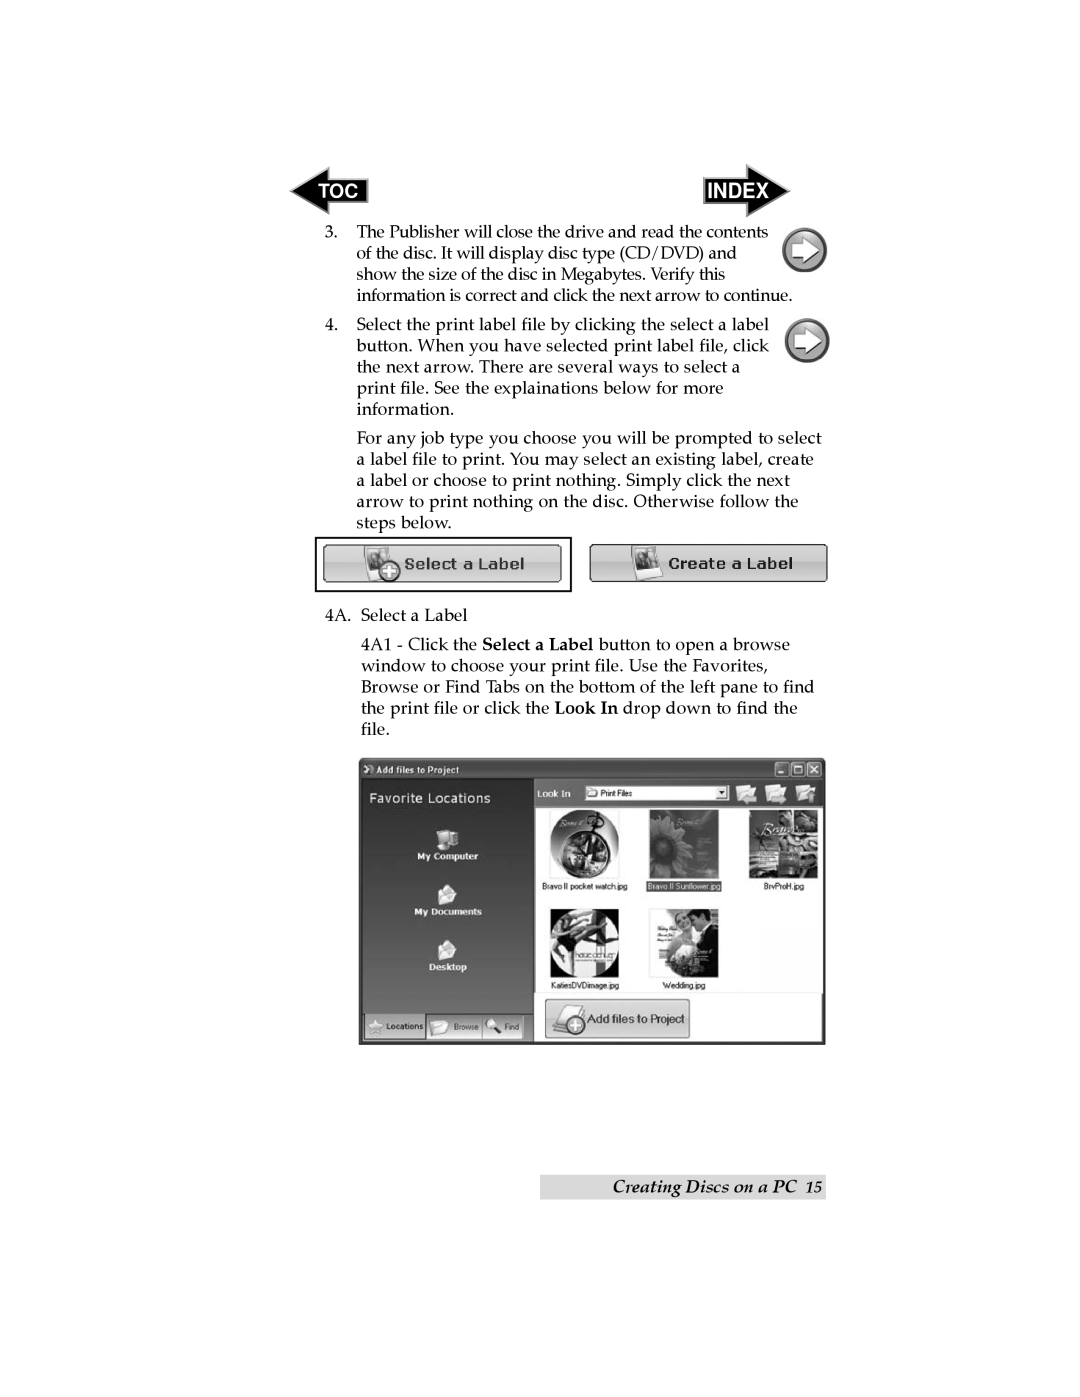 Primera Technology SE user manual Creating Discs on a PC, Index 